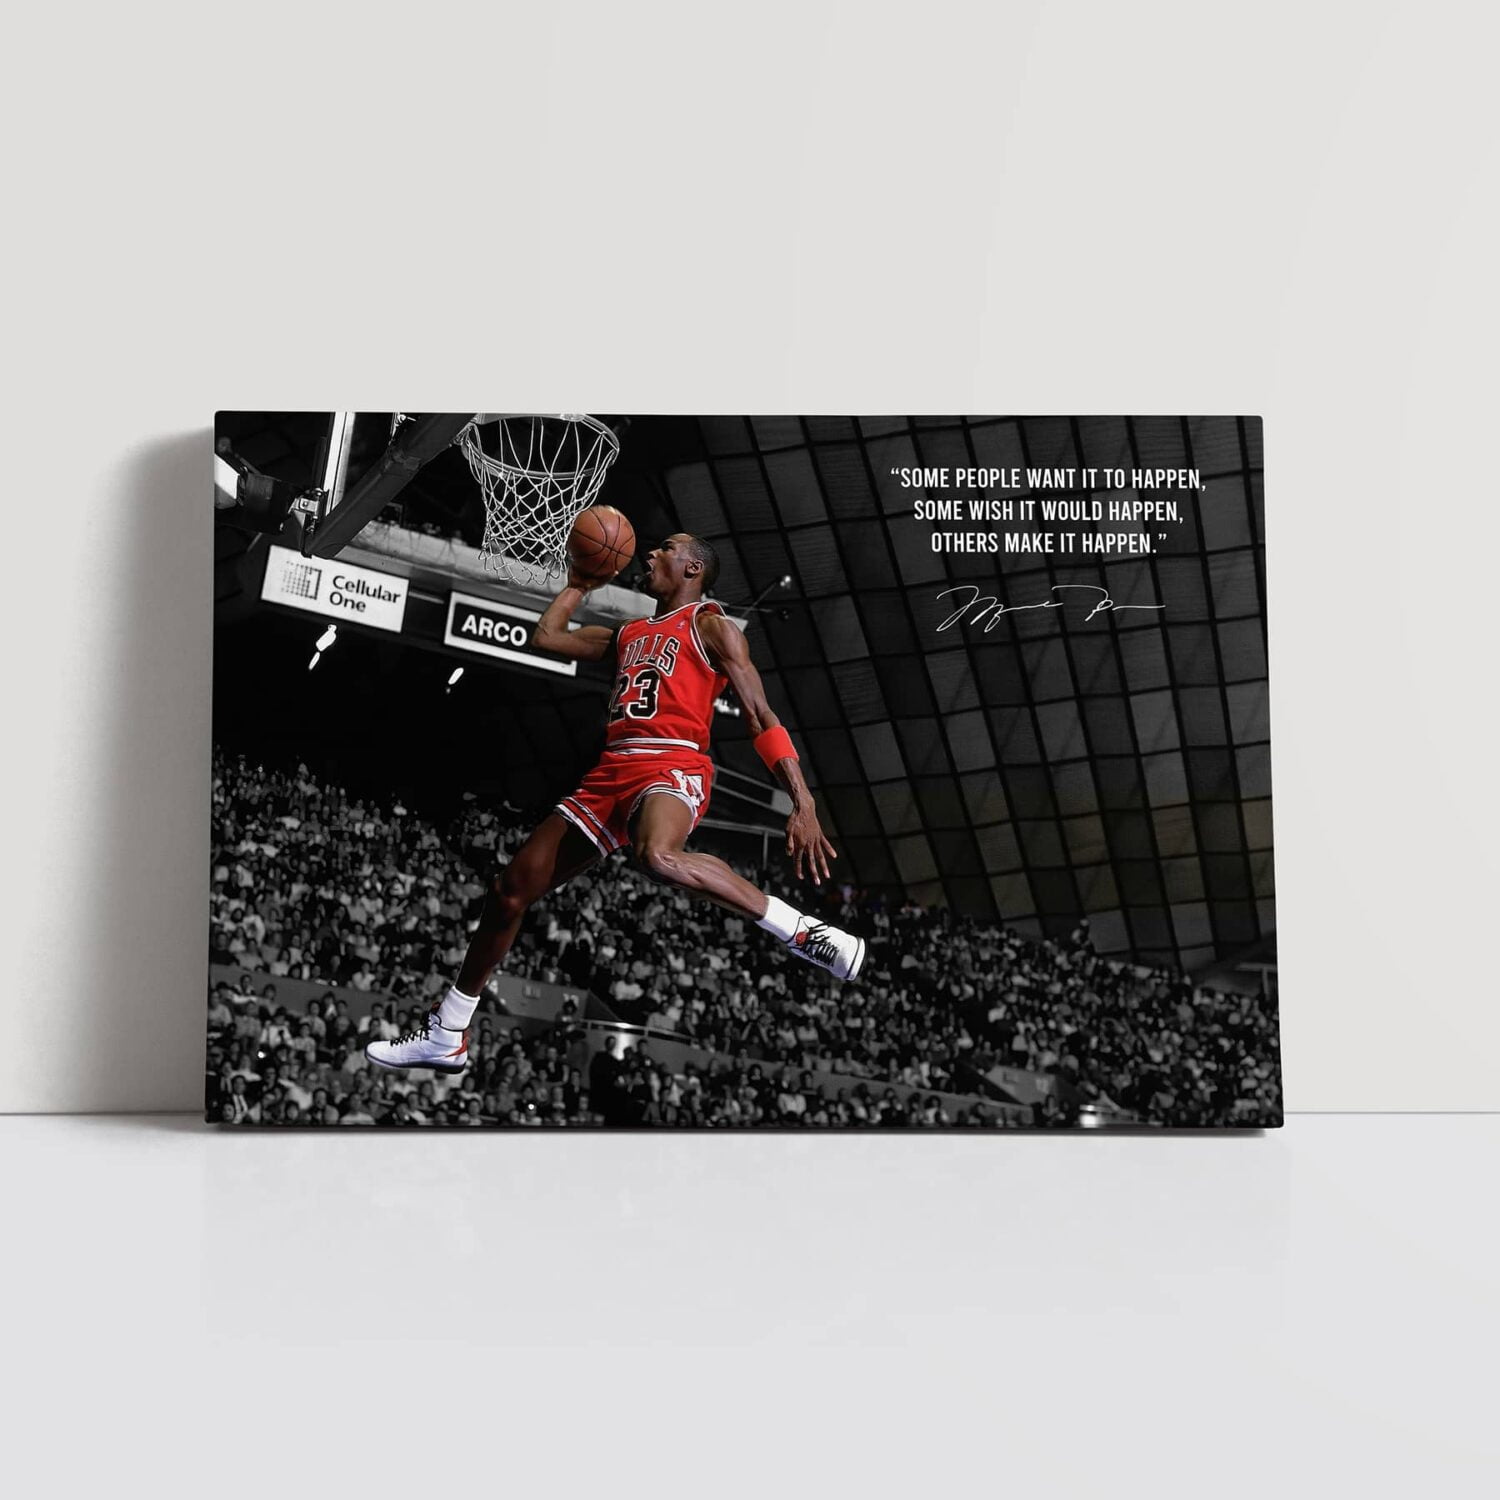 Canvas featuring Michael Jordan leaping during the Slam Dunk contest